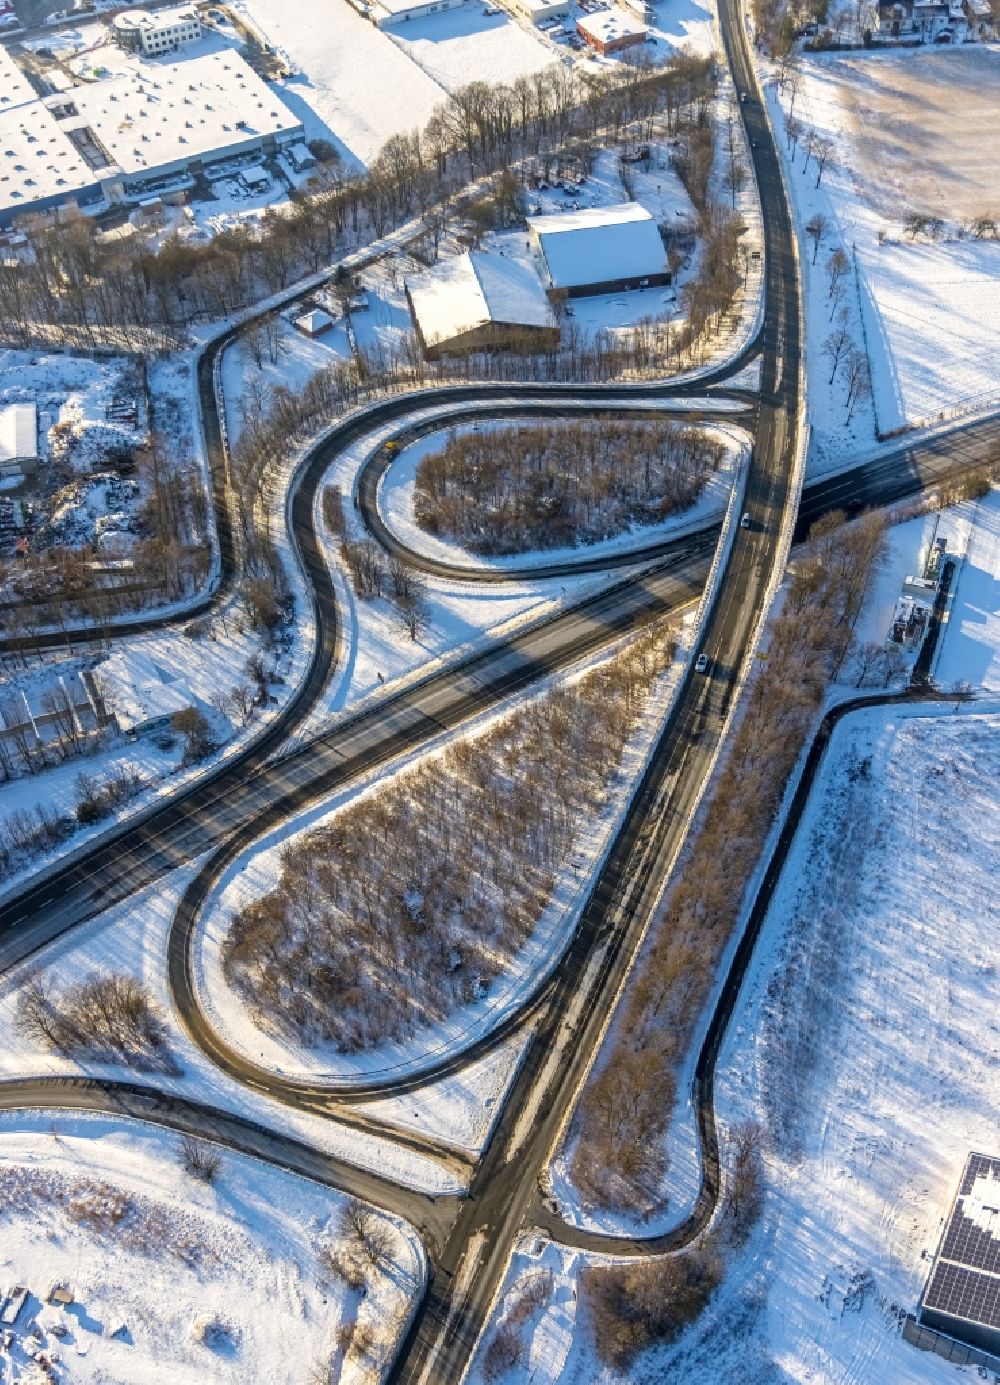 Soest from above - Wintry snowy routing and traffic lanes during the exit federal highway B475 on Opmuender Weg in Soest in the state North Rhine-Westphalia, Germany